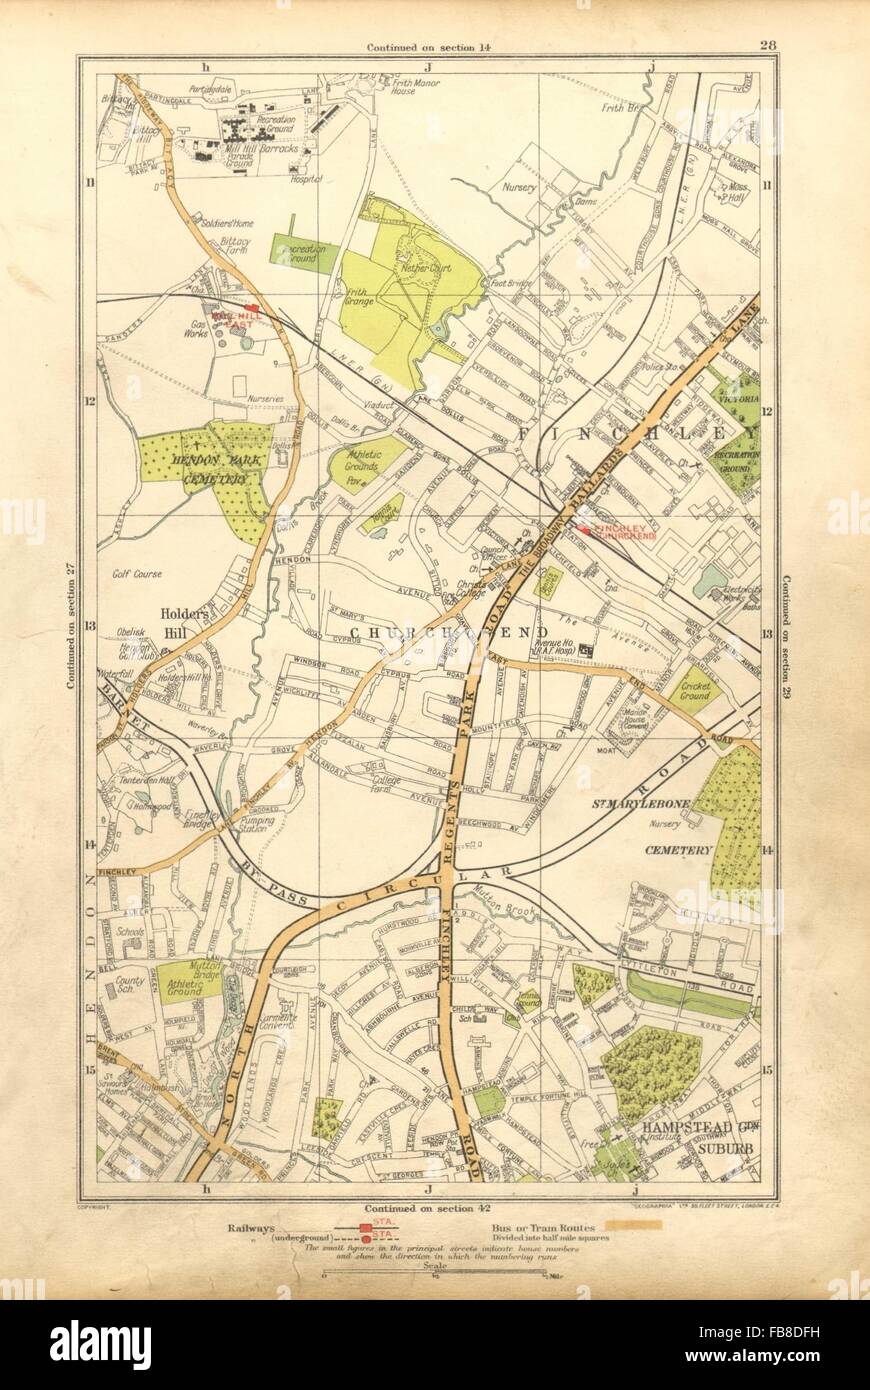 FINCHLEY: Church End, Hampstead Garden Suburb, Mill Hill, Hendon, 1928 old map Stock Photo